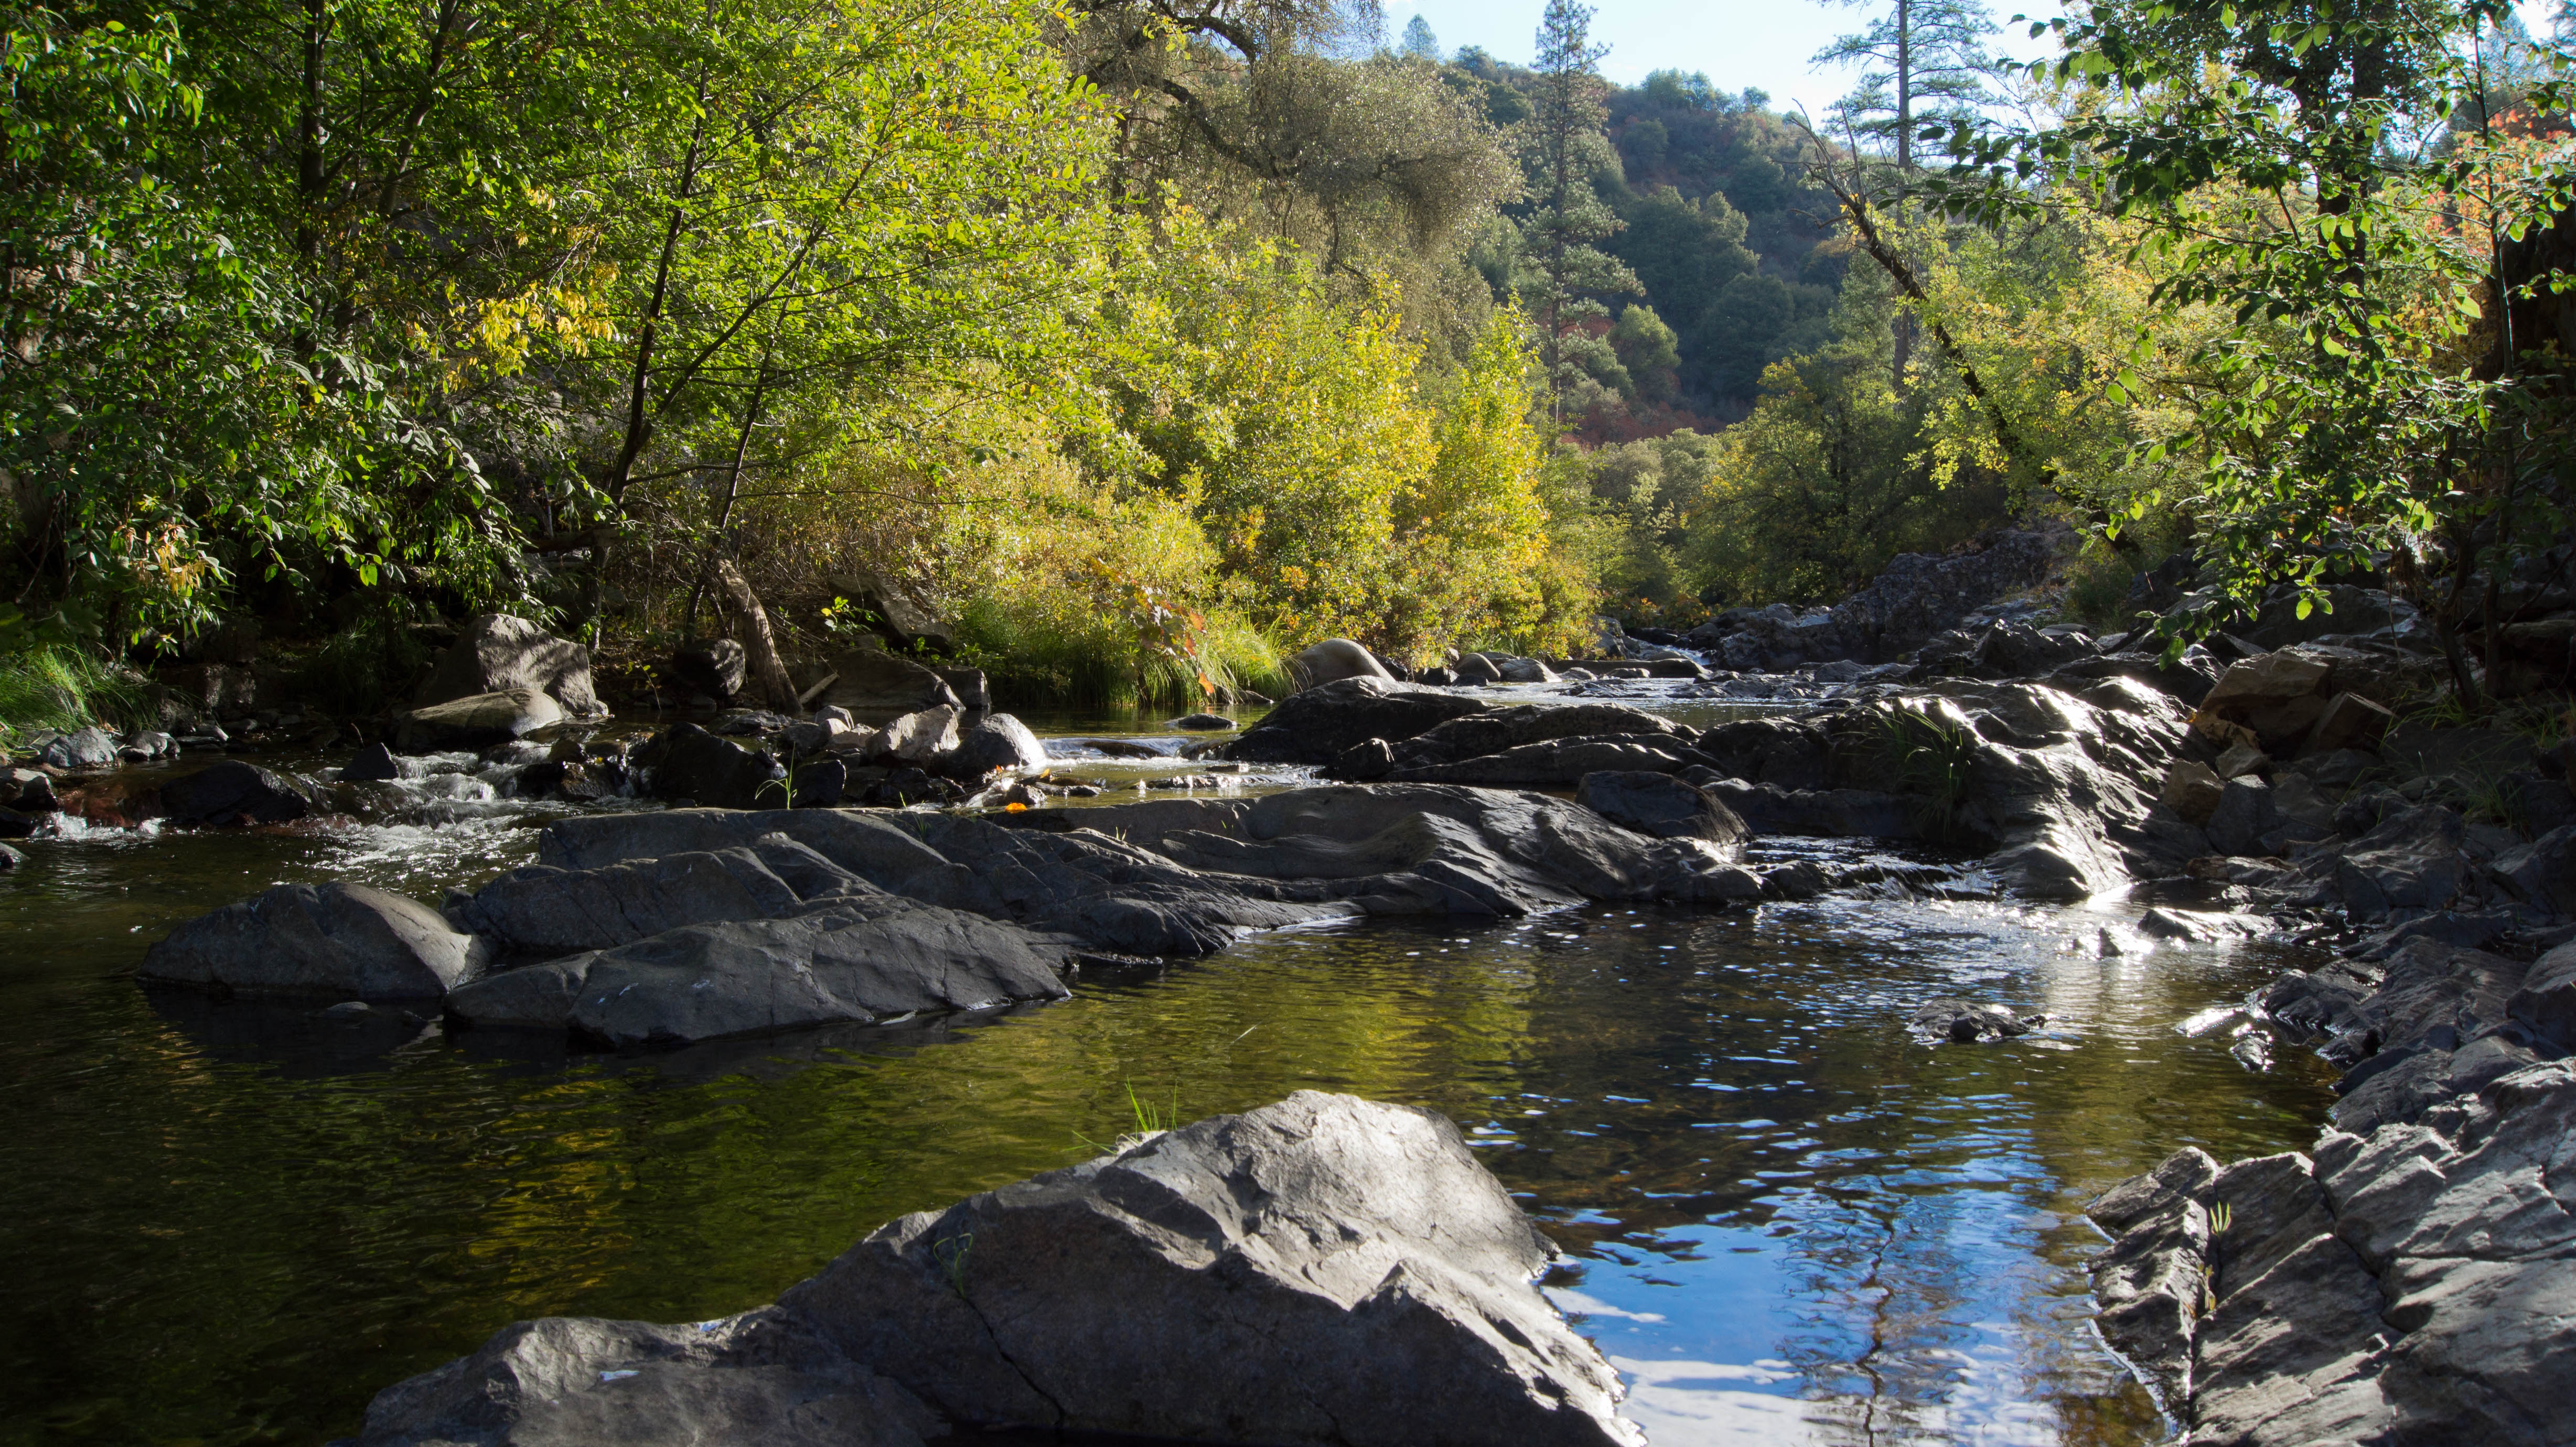 An image of the south fork of the Tuolumne River.